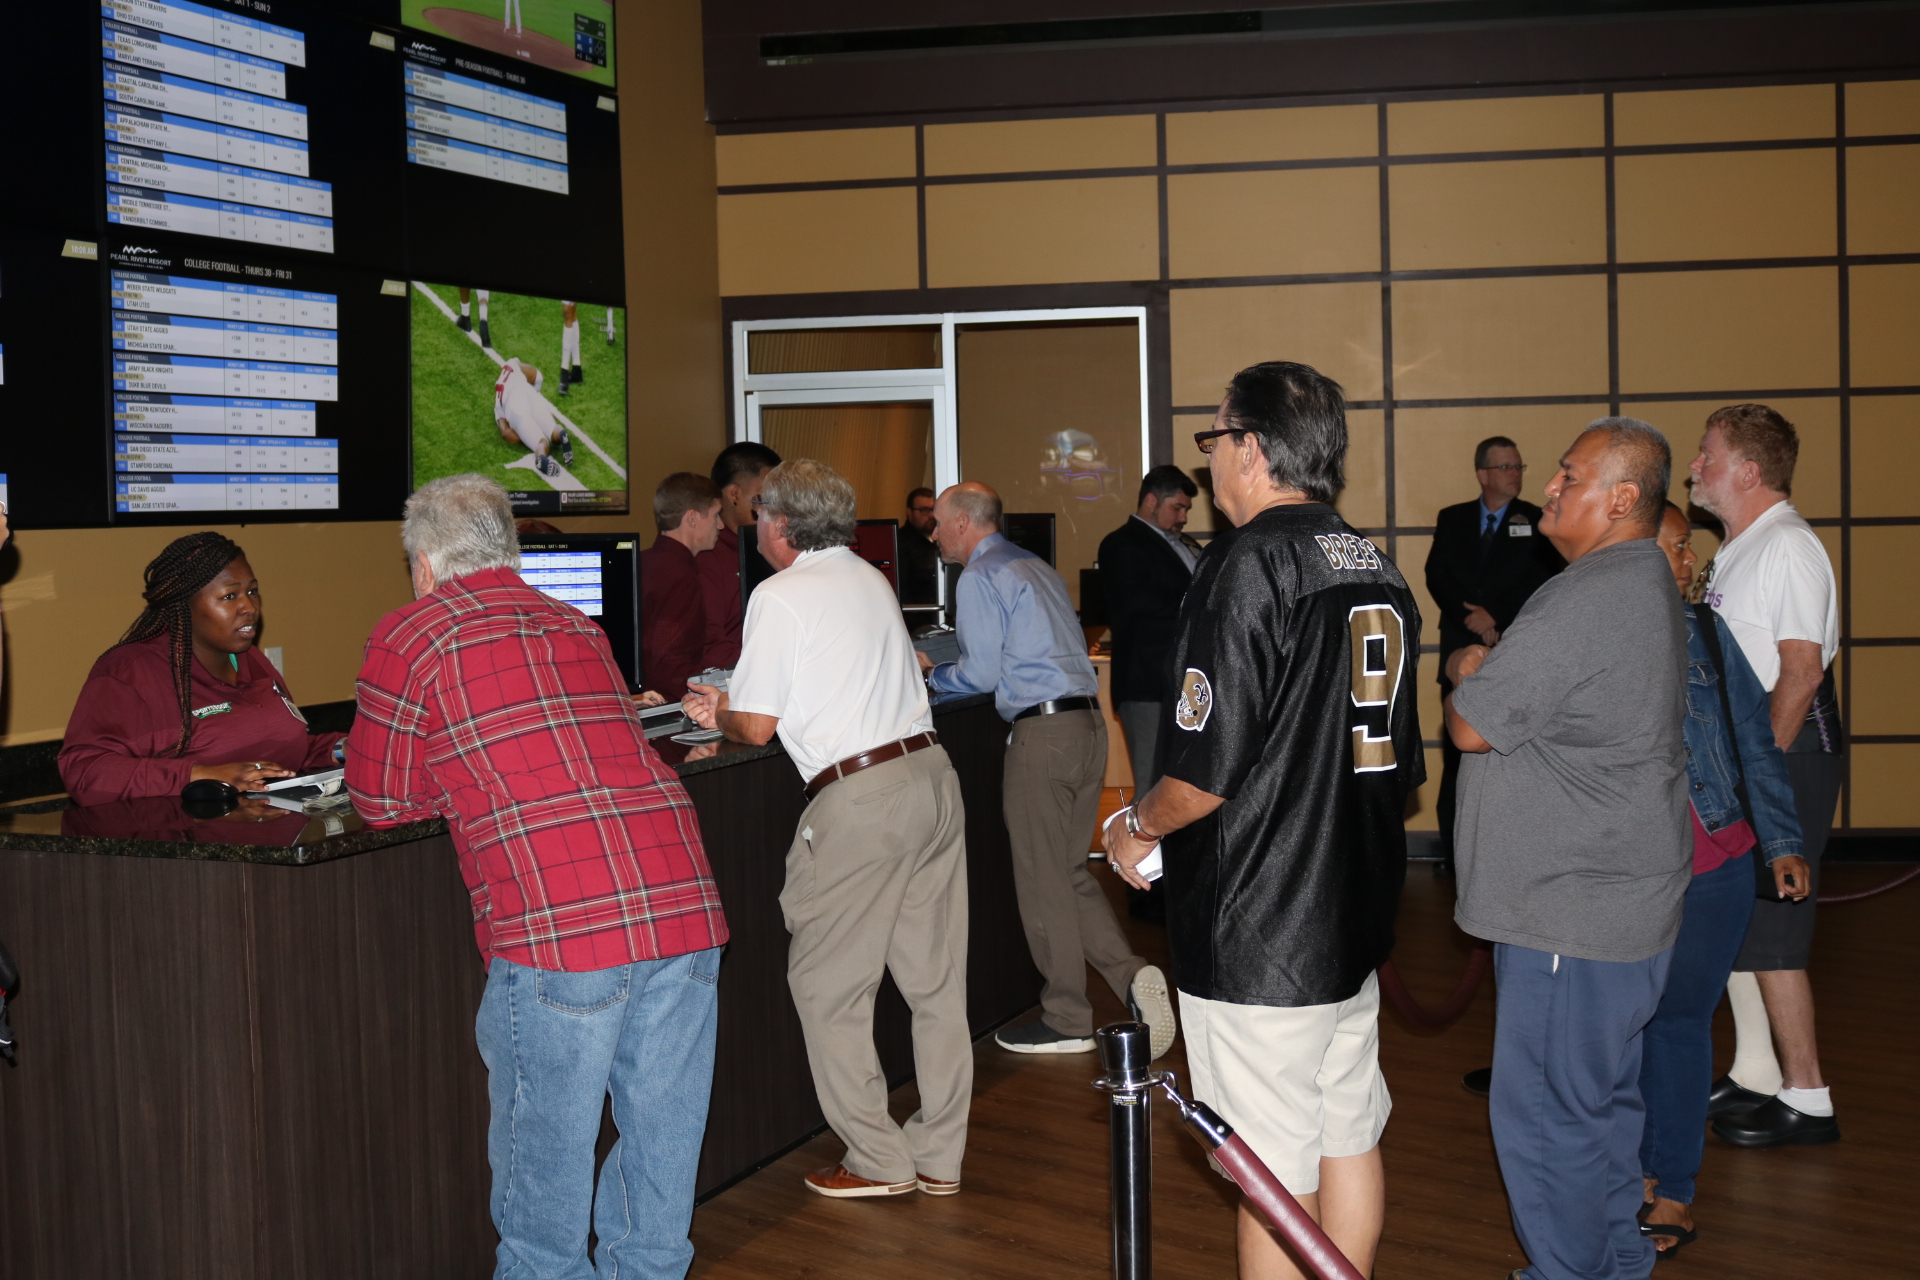 Guests line up to place wagers at The Sportsbook at Golden Moon Casino